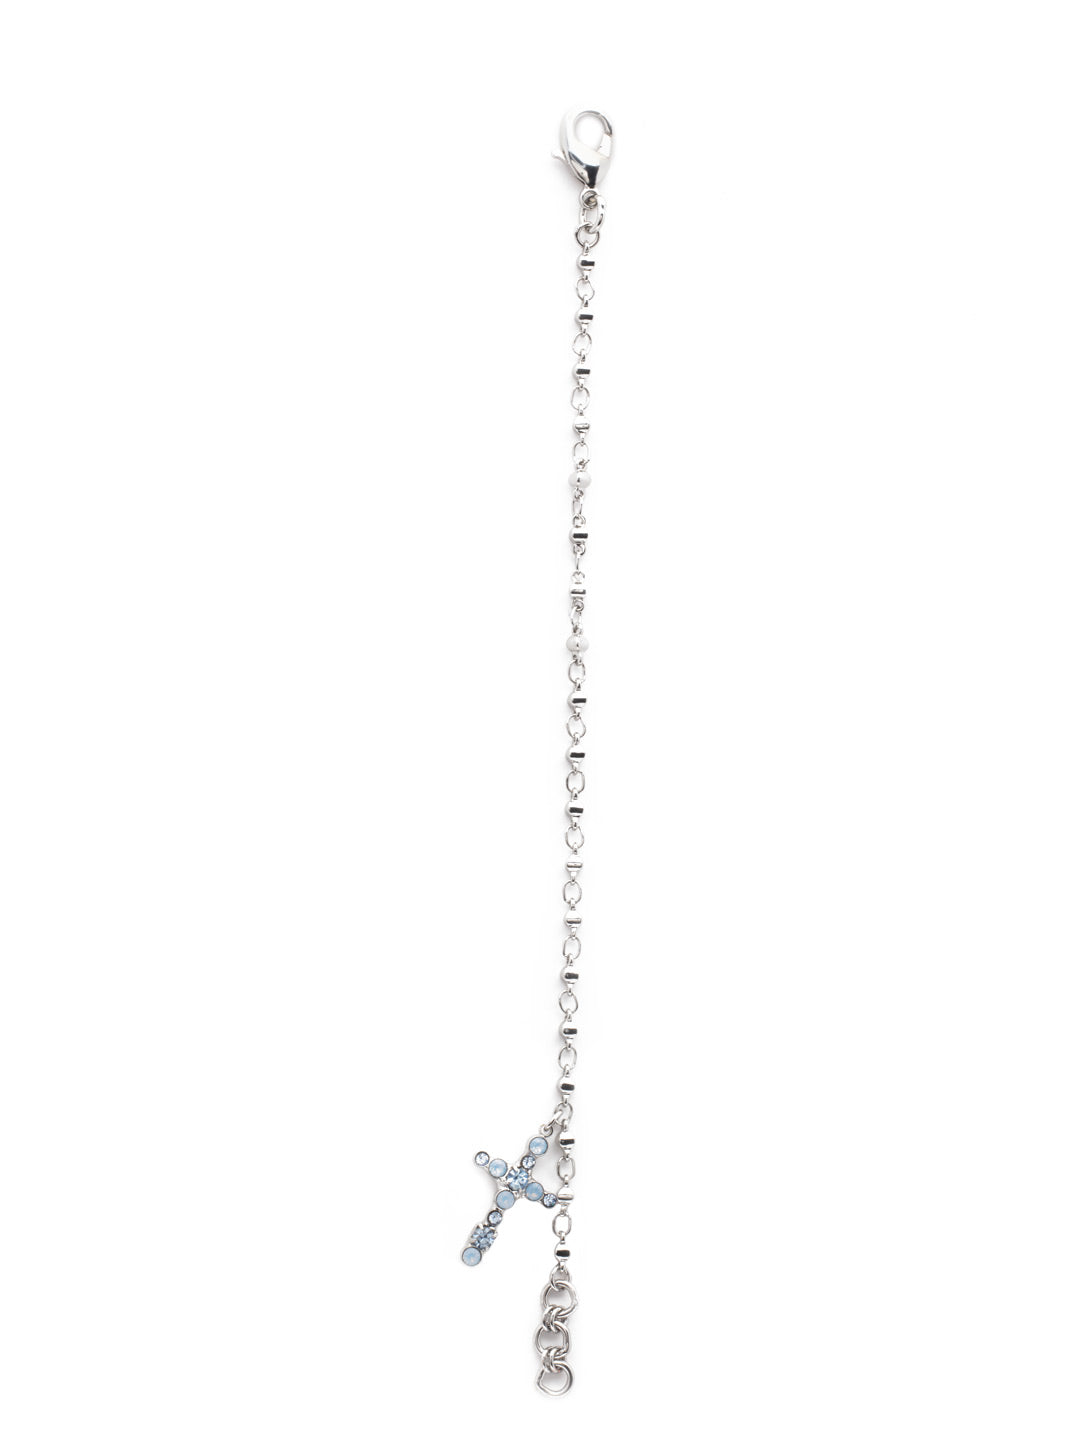 Miley Cross Charm Bracelet - BEX2PDWNB - The Miley Cross Charm Bracelet features a crystal cross charm on a decorative link chain, perfect for wearing alone or layered with other bracelets. From Sorrelli's Windsor Blue collection in our Palladium finish.